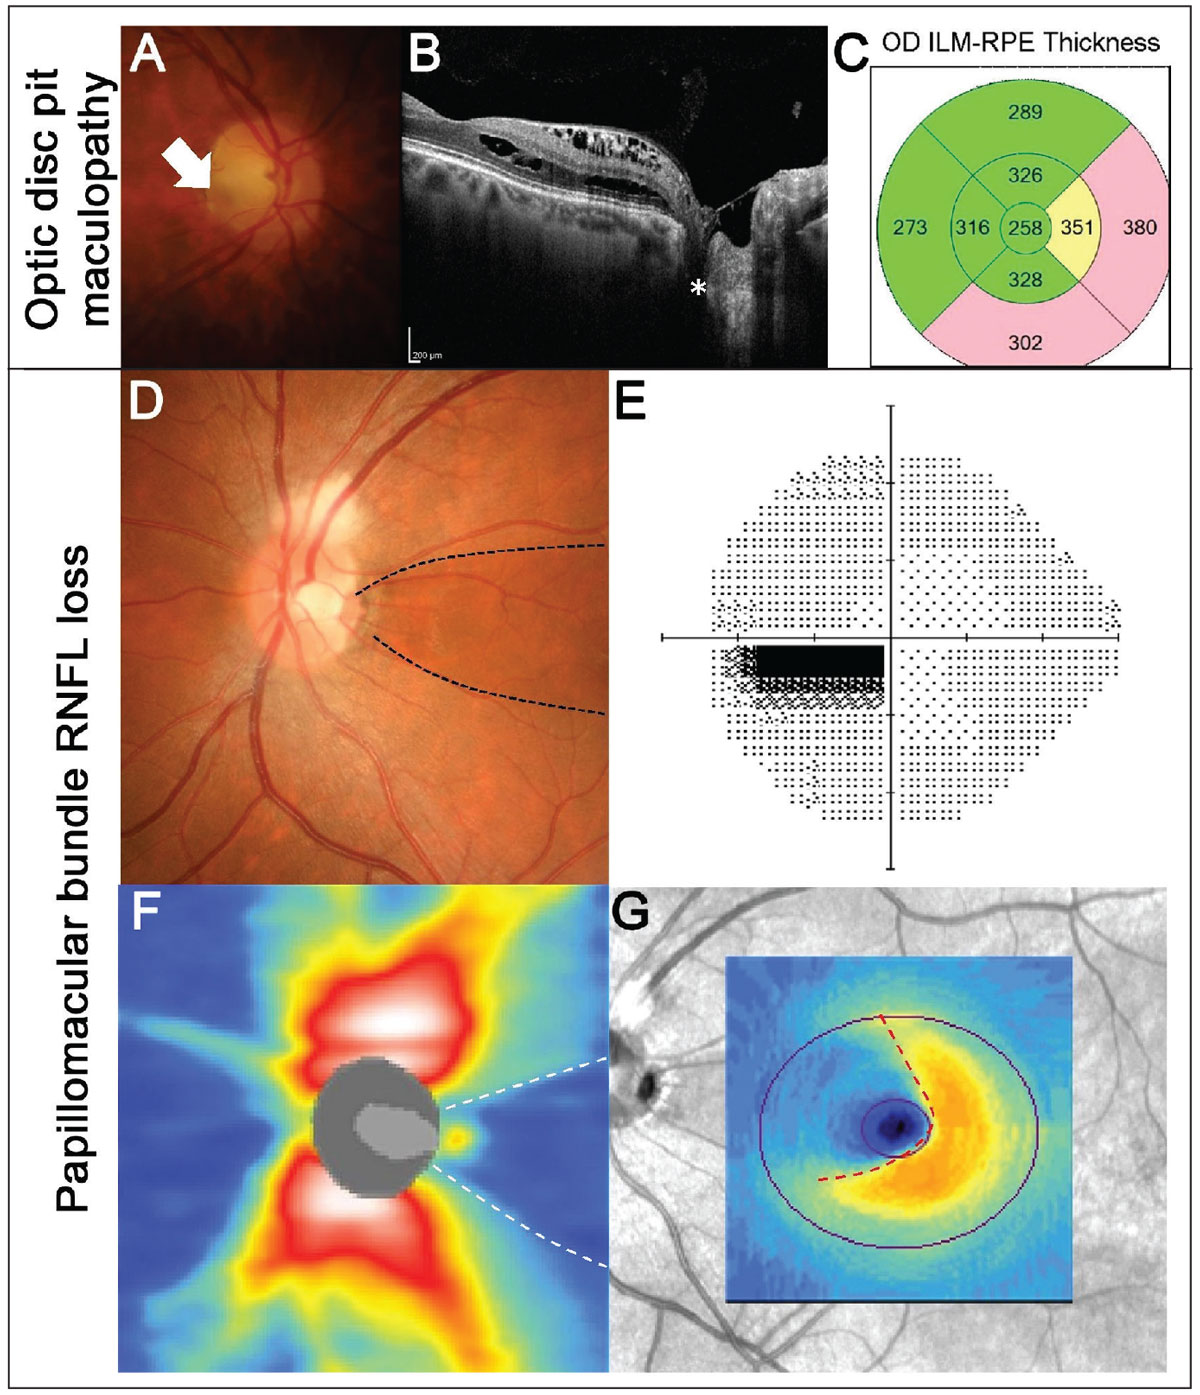 Fig. 2. Example of maculopathy associated with an optic disc pit. (A) Fundus photography shows an optic disc pit temporally (white arrow) in the right eye. (B) OCT line scans show the disc pit (white asterisk) with associated intraretinal fluid accumulation extending from the disc to the fovea. (C) EDTRS macular thickness grid shows thickening of the nasal and inferior subfields corresponding to the regions of fluid. (D-G) An example of papillomacular bundle loss associated with an optic disc pit (black dashed lines). (D) Fundus photography shows a temporal disc pit. Note there is also RNFL myelination superiorly. (E) A 24-2 visual field test showed a centrocecal defect in the left eye, corresponding to the RNFL defect. (F) OCT RNFL thickness heat map shows reduced RNFL thickness temporally (white dashed lines). (G) Macular ganglion cell analysis shows nasal loss (red dashed lines).